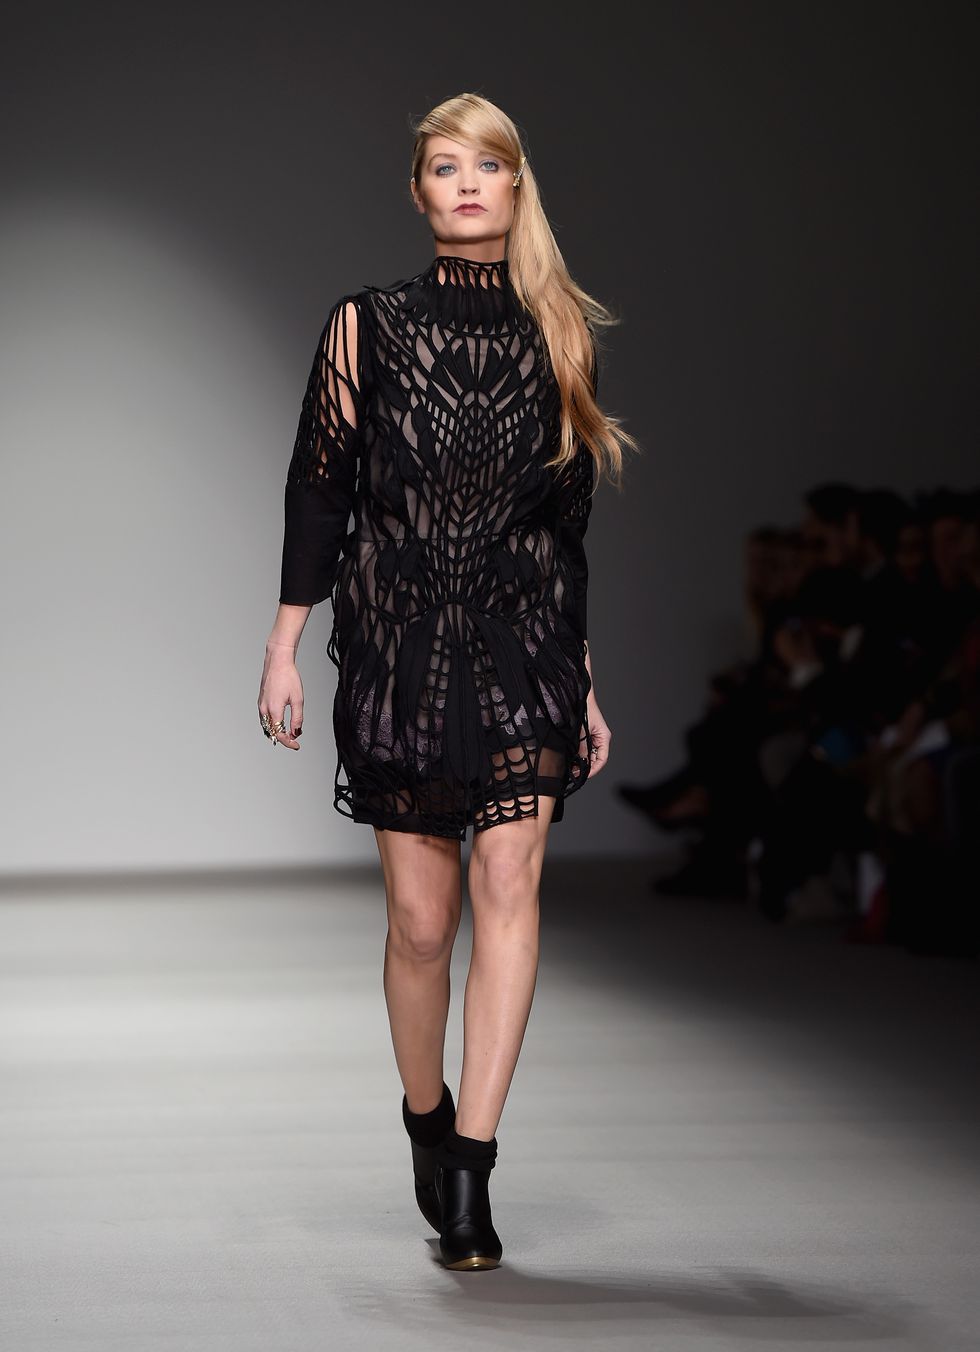 Laura Whitmore modelling a LBD at the Bora Aksu AW14 show